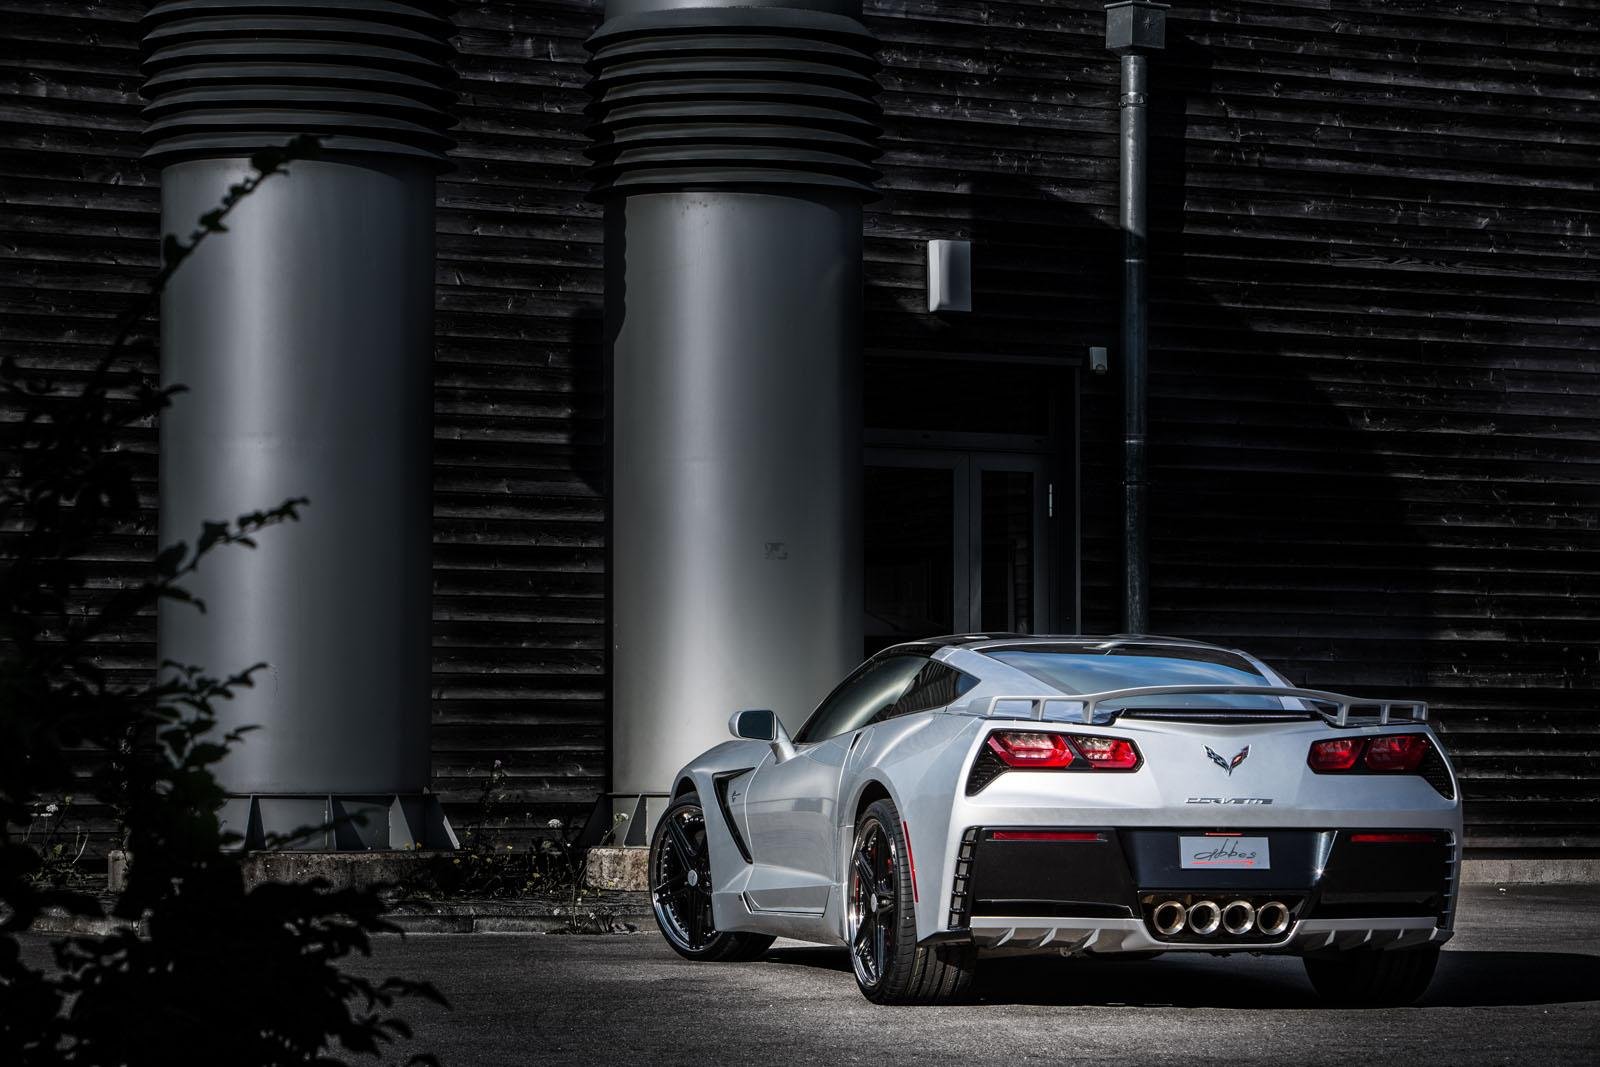 chevy, Corvette c7, Stingray, Supercharged, Tuning, Coupe, Cars Wallpaper